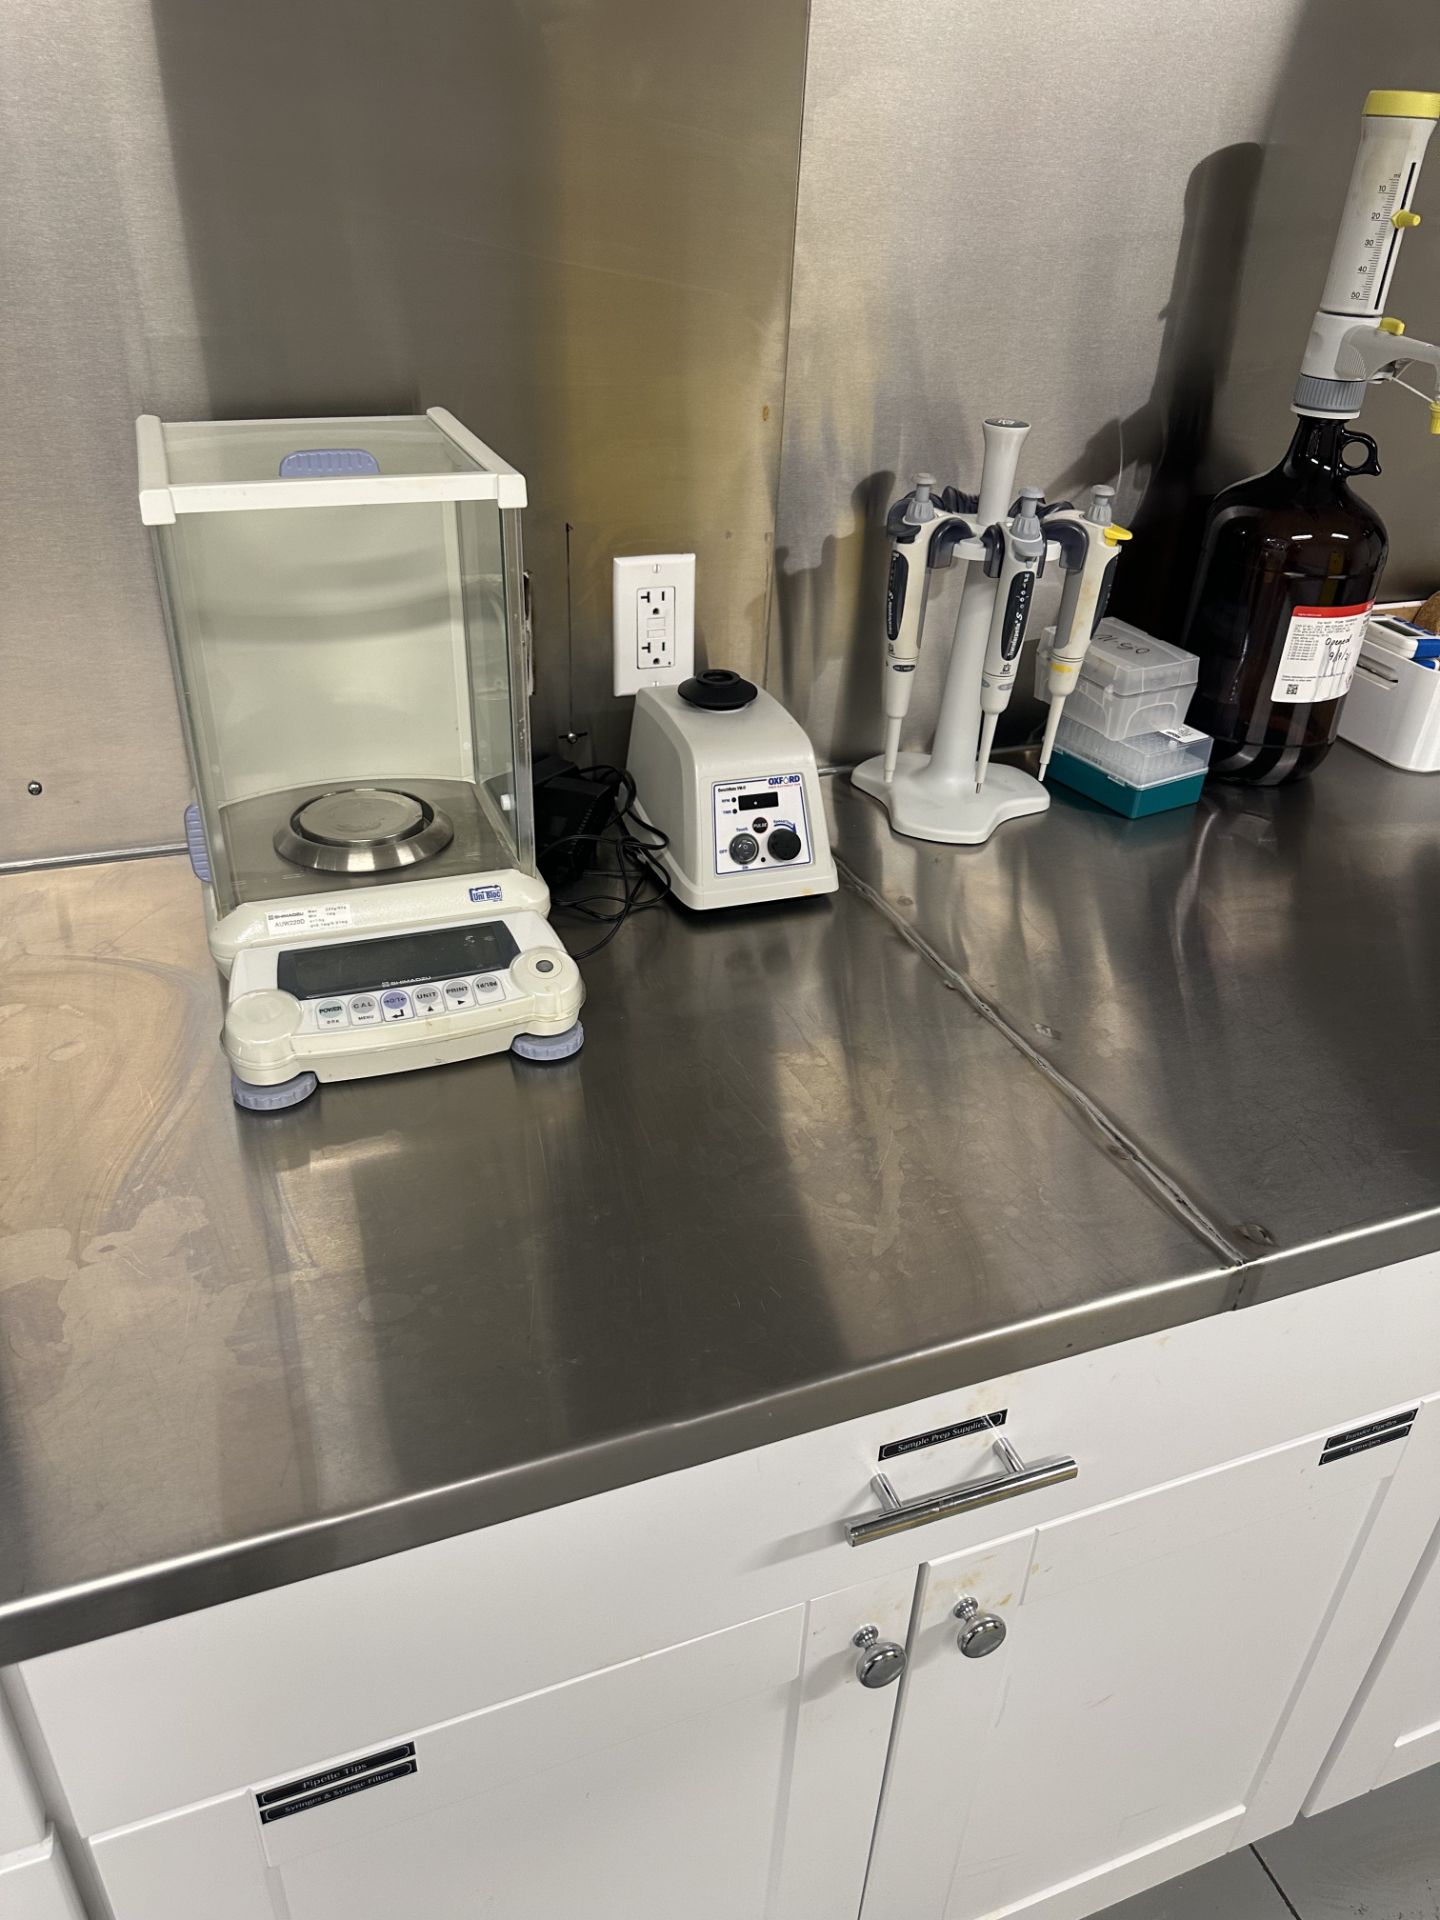 Lot of Used Lab Equiipment Including Shimadzu Lab Scale, Oxford BenchMate VM-D. + More